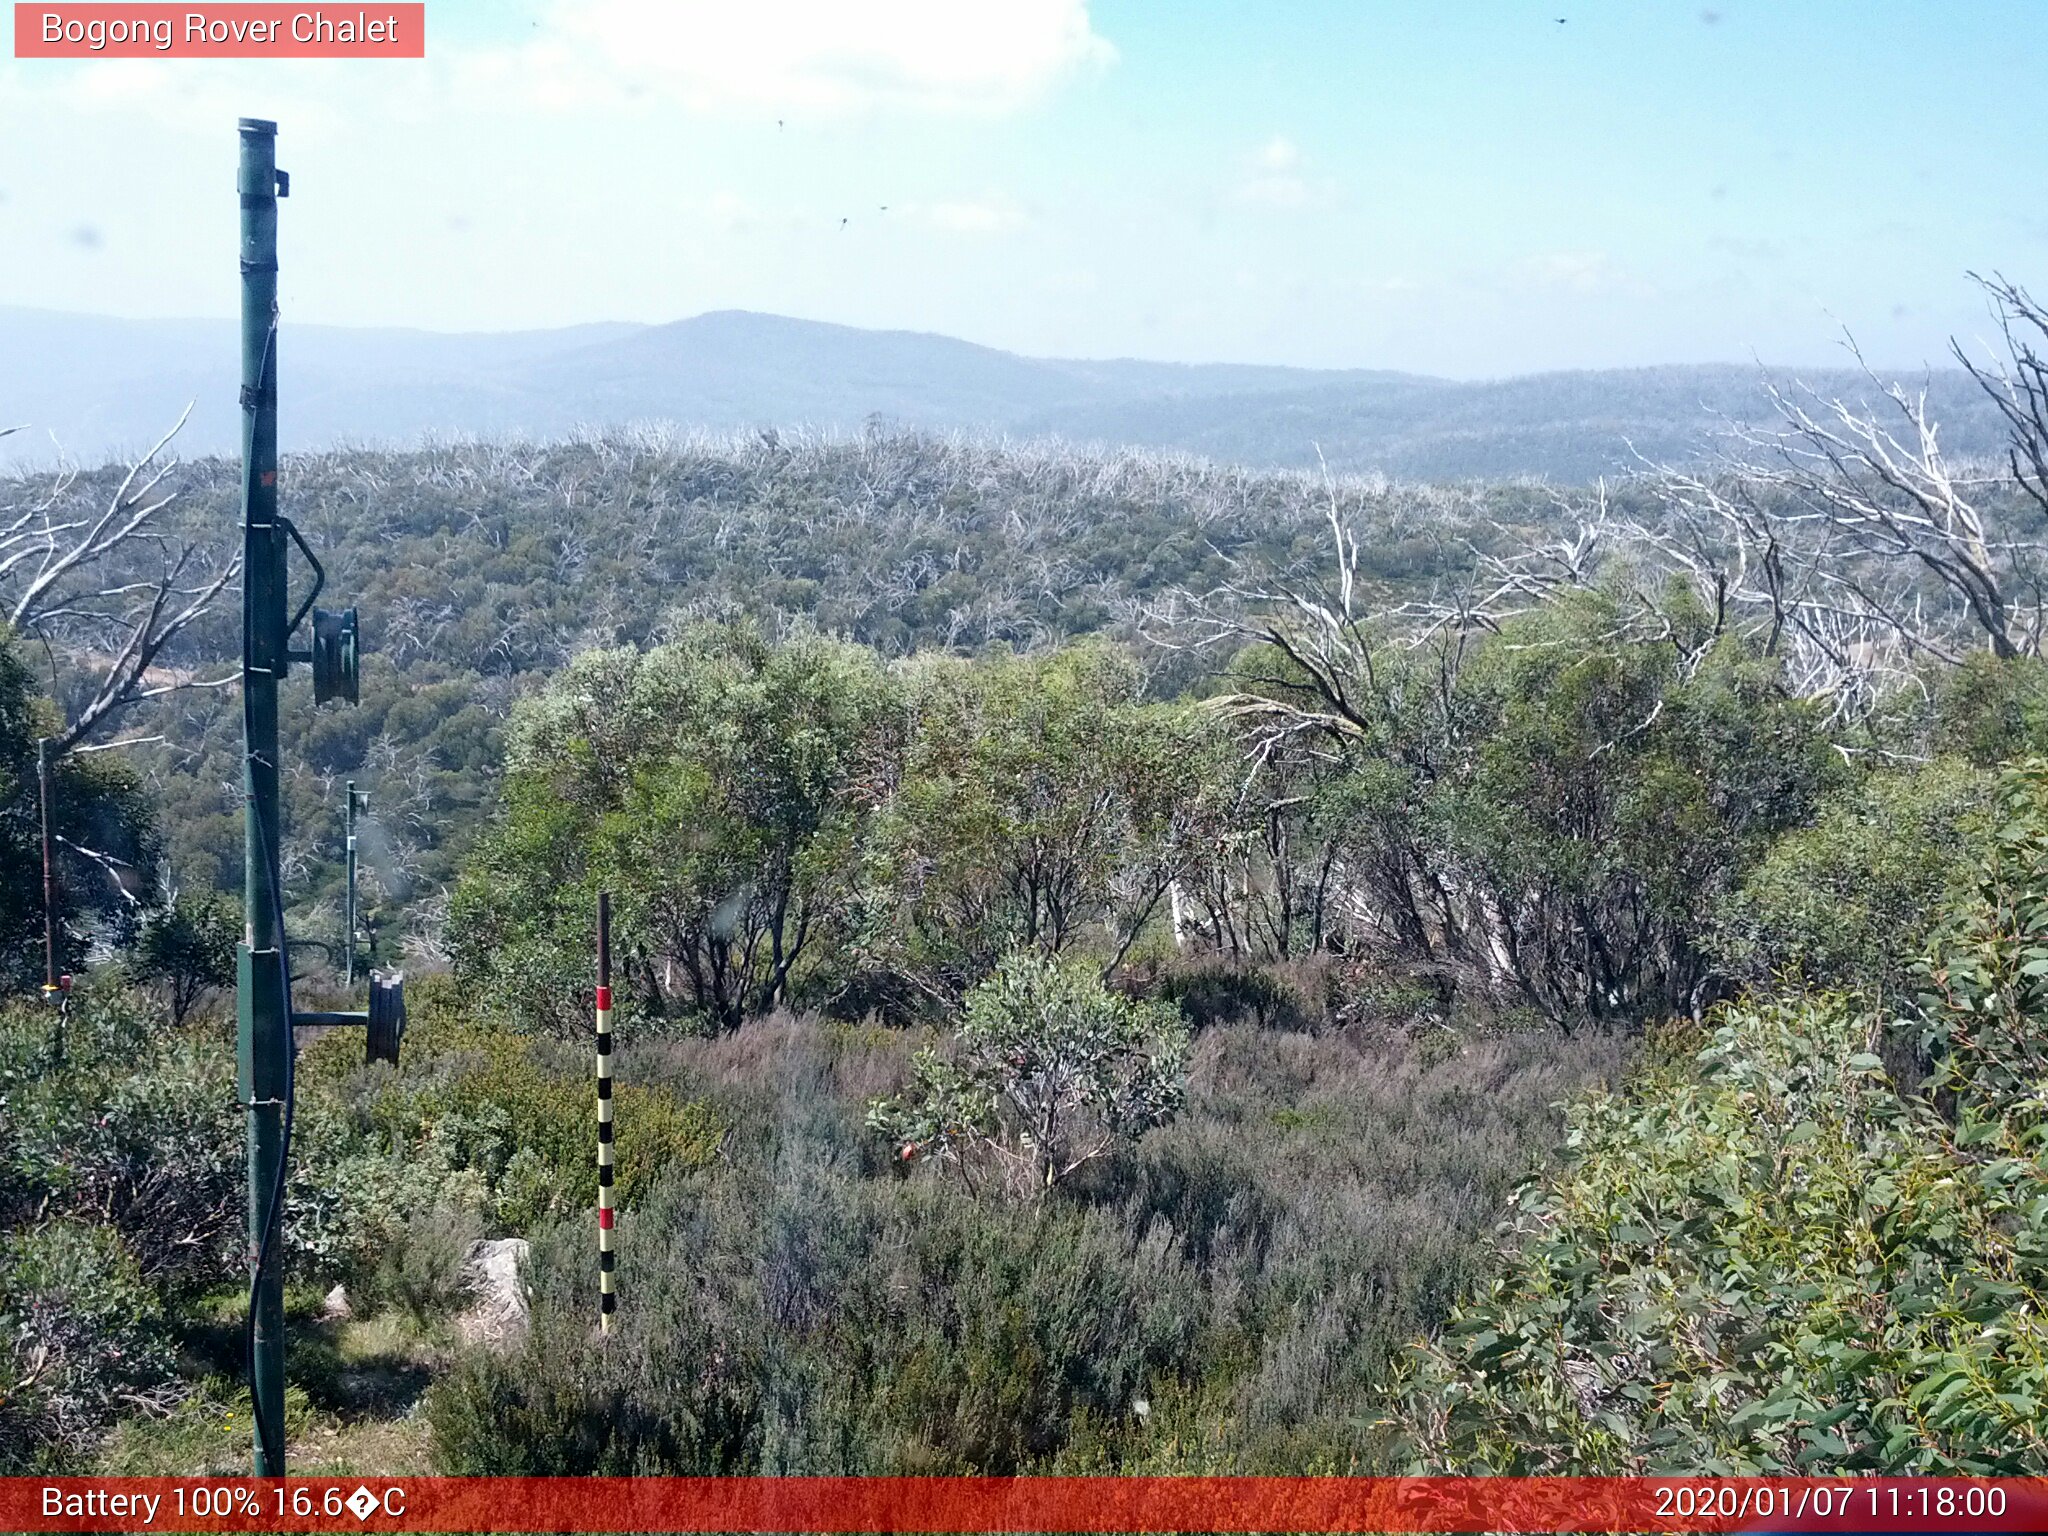 Bogong Web Cam 11:18am Tuesday 7th of January 2020